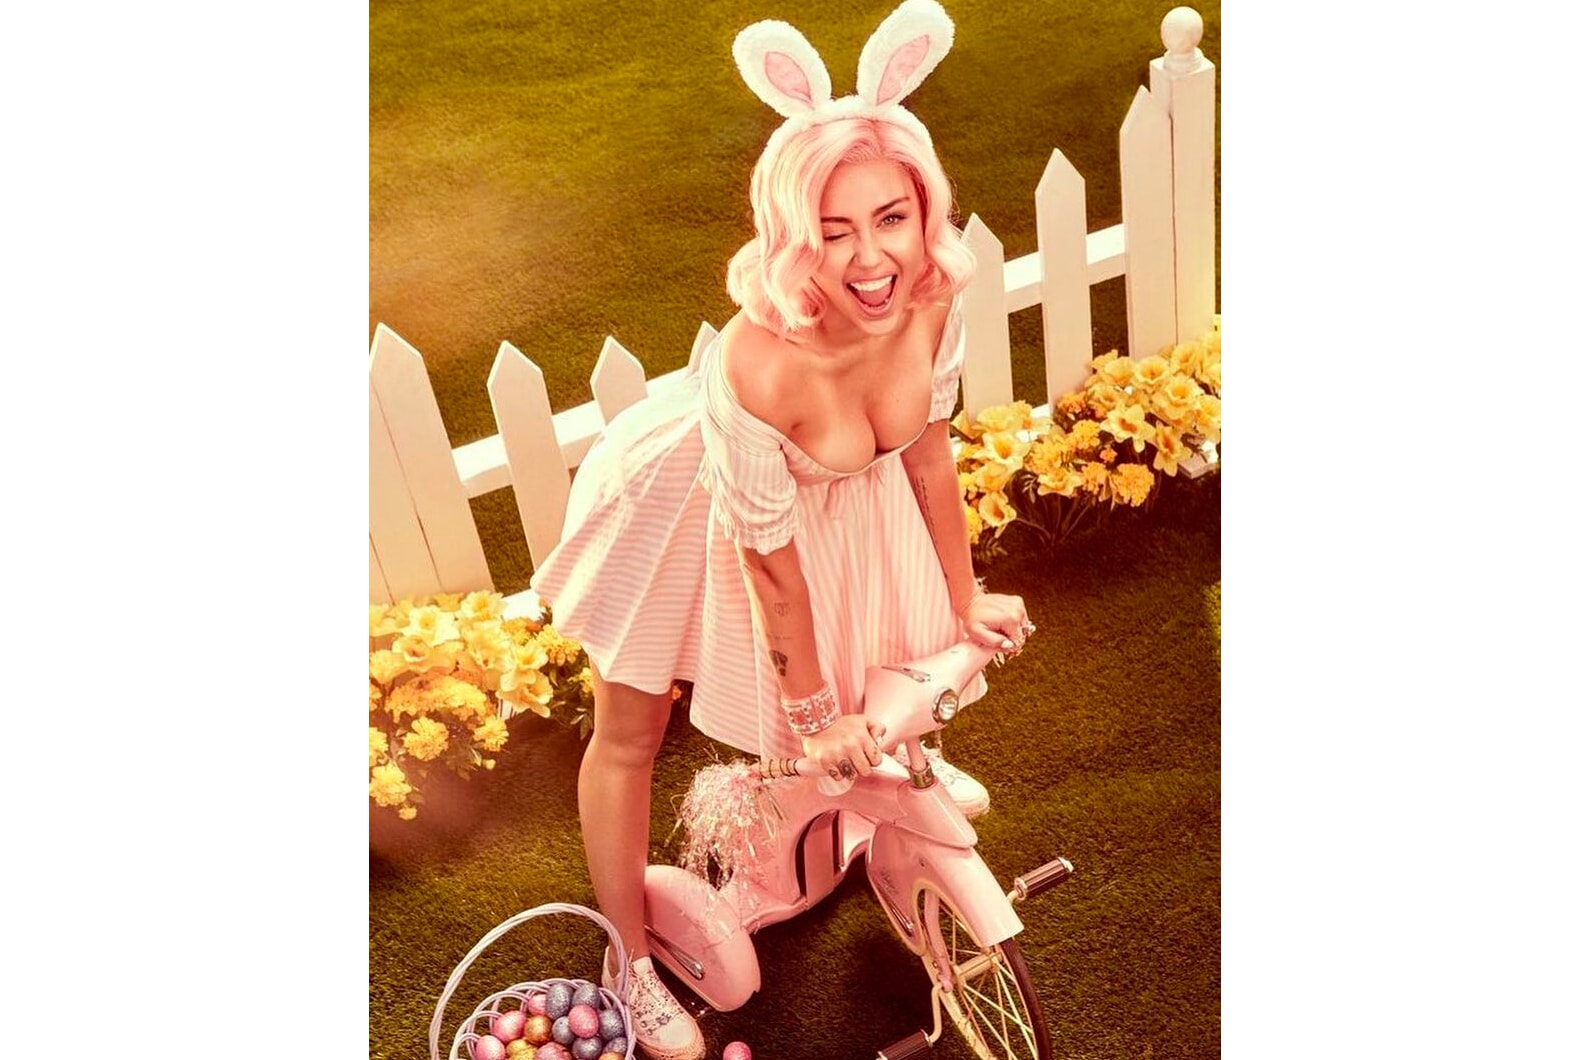 Miley Cyrus Converse Chuck Taylor Sparkly Easter 2018 Editorial Videos Photoshoot Pink Pastel Eggs Bunny Instagram